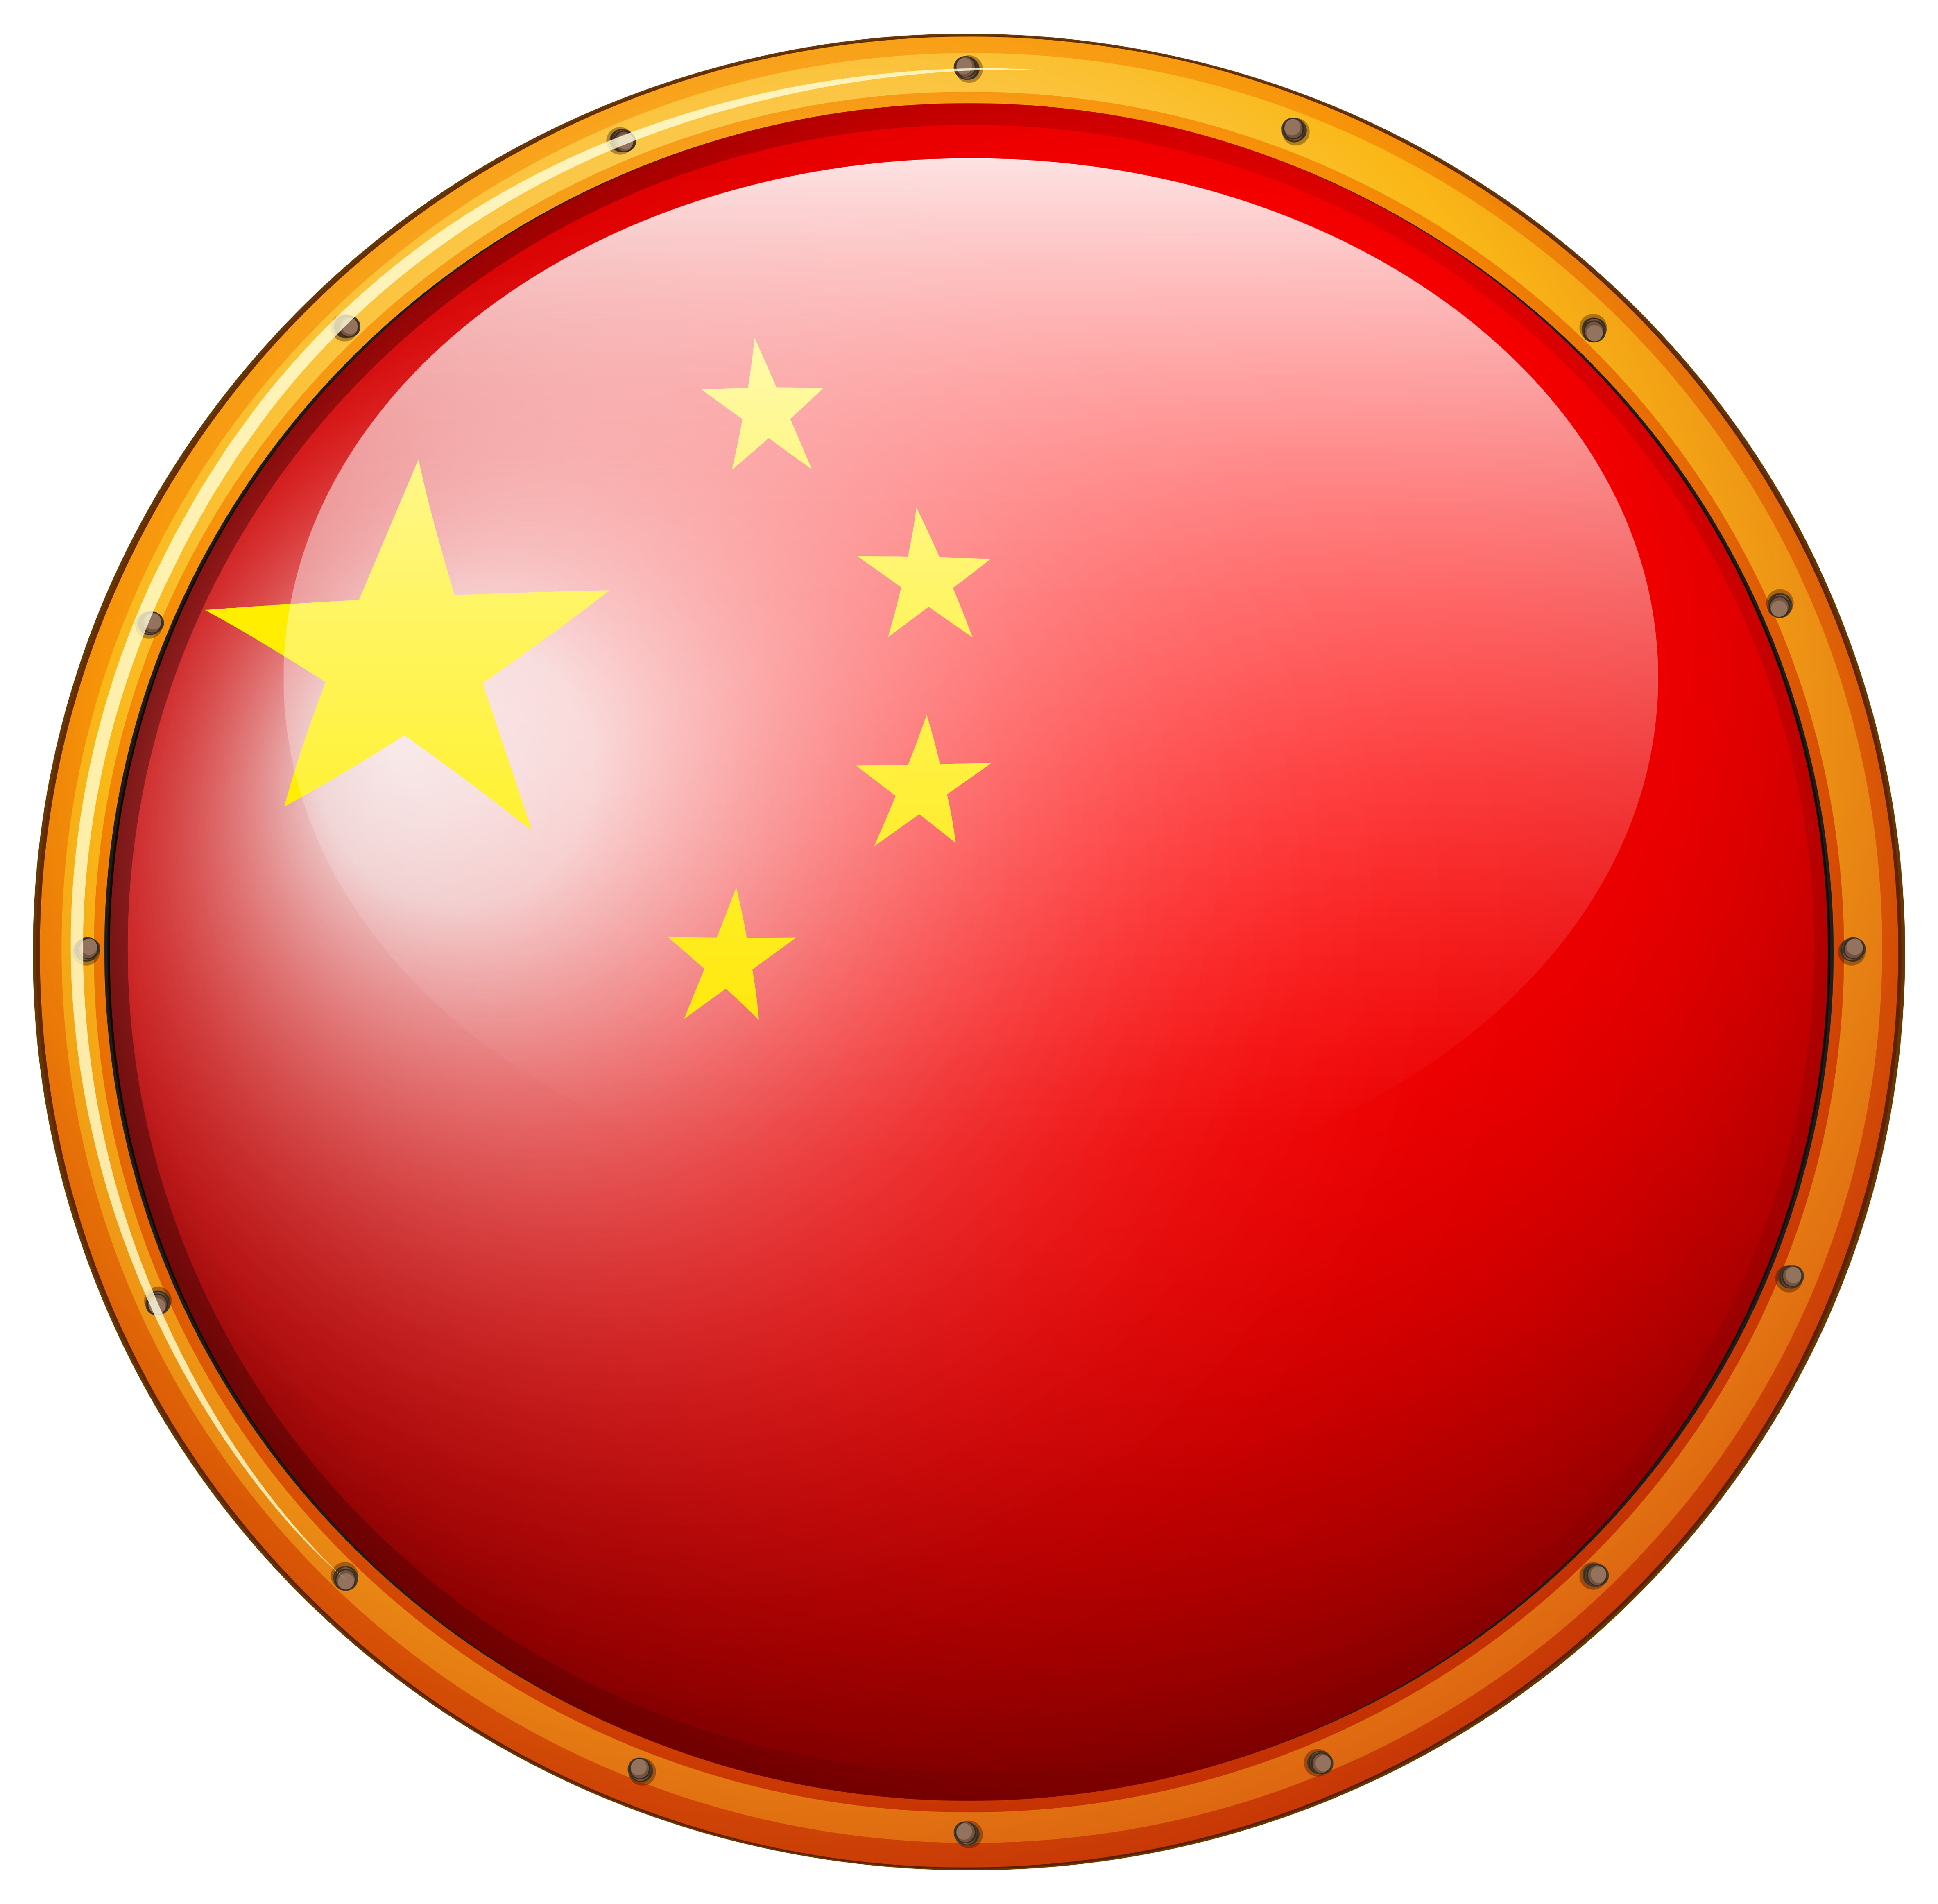 Round icon for flag of China - Download Free Vectors ...